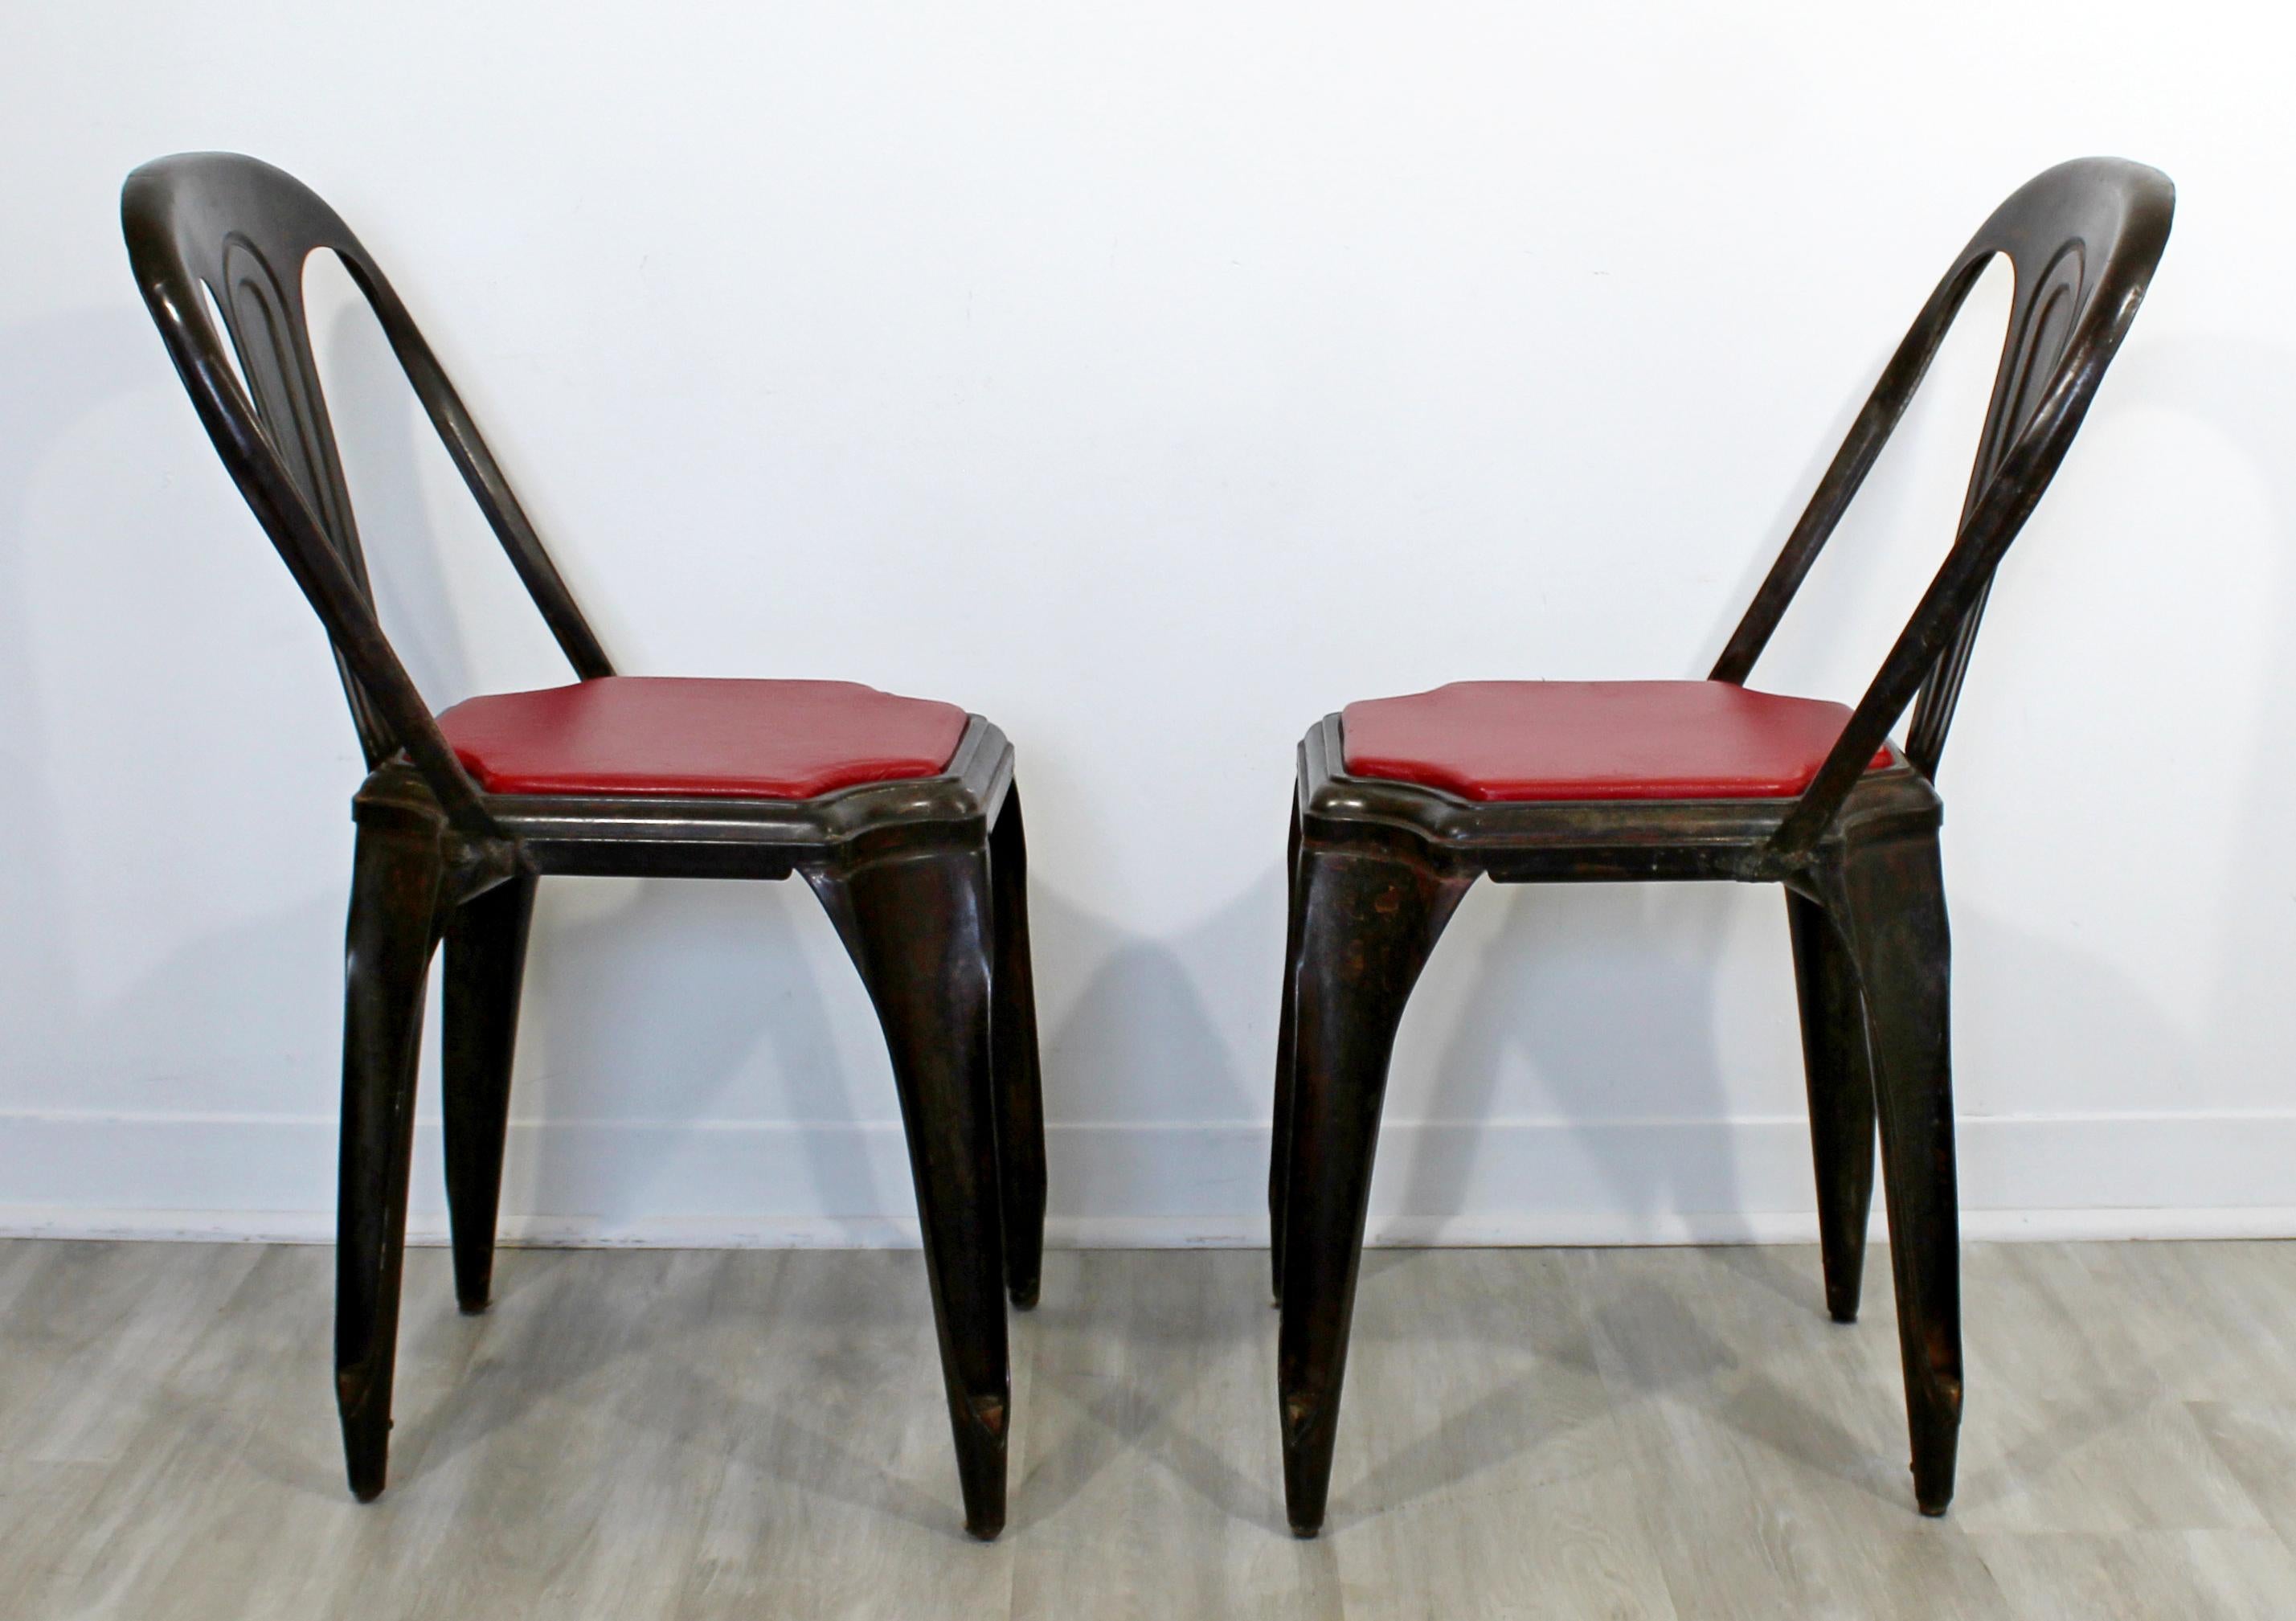 For your consideration is a phenomenal pair of Fibrocit, stacking, bistro chairs, made in France, circa 1950s. In very good vintage condition. The dimensions are 16.5